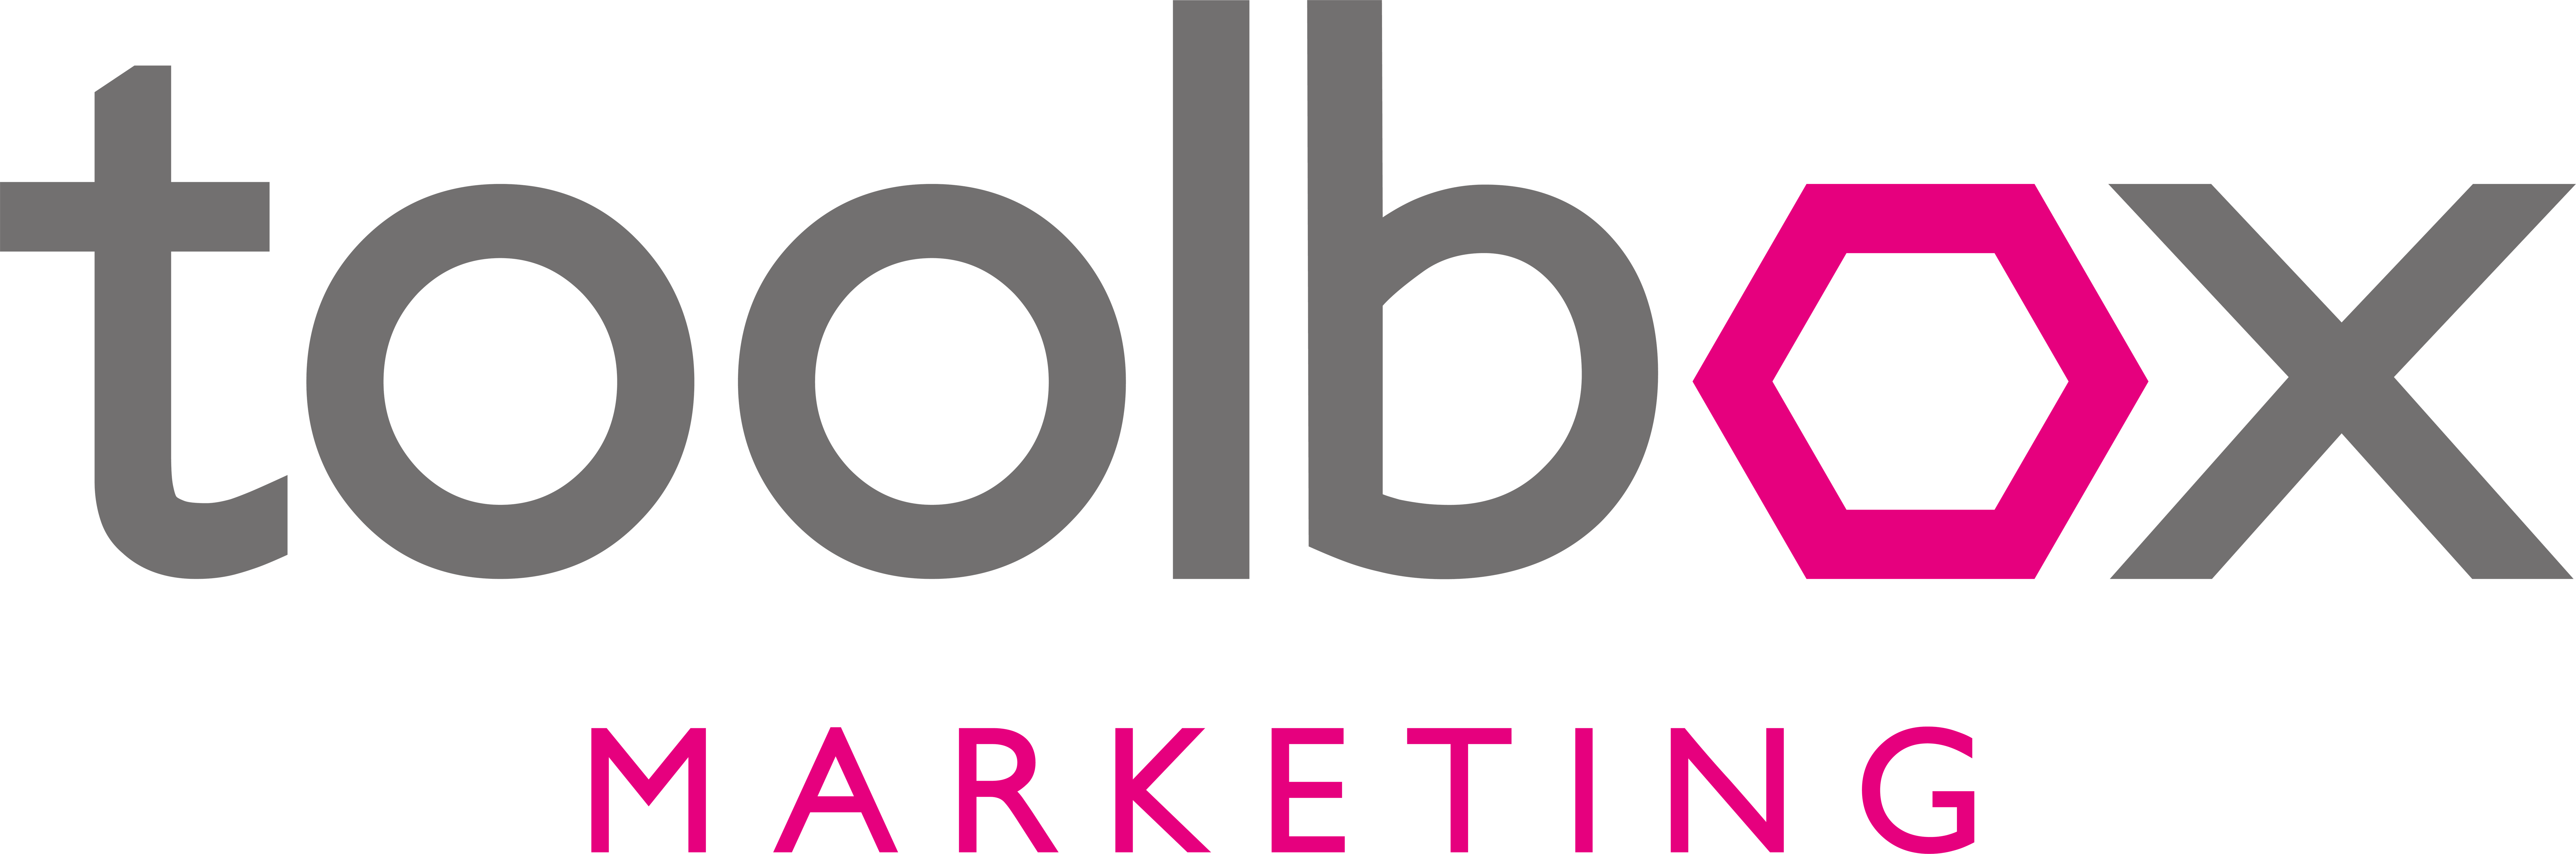 logo for Toolbox Marketing Services